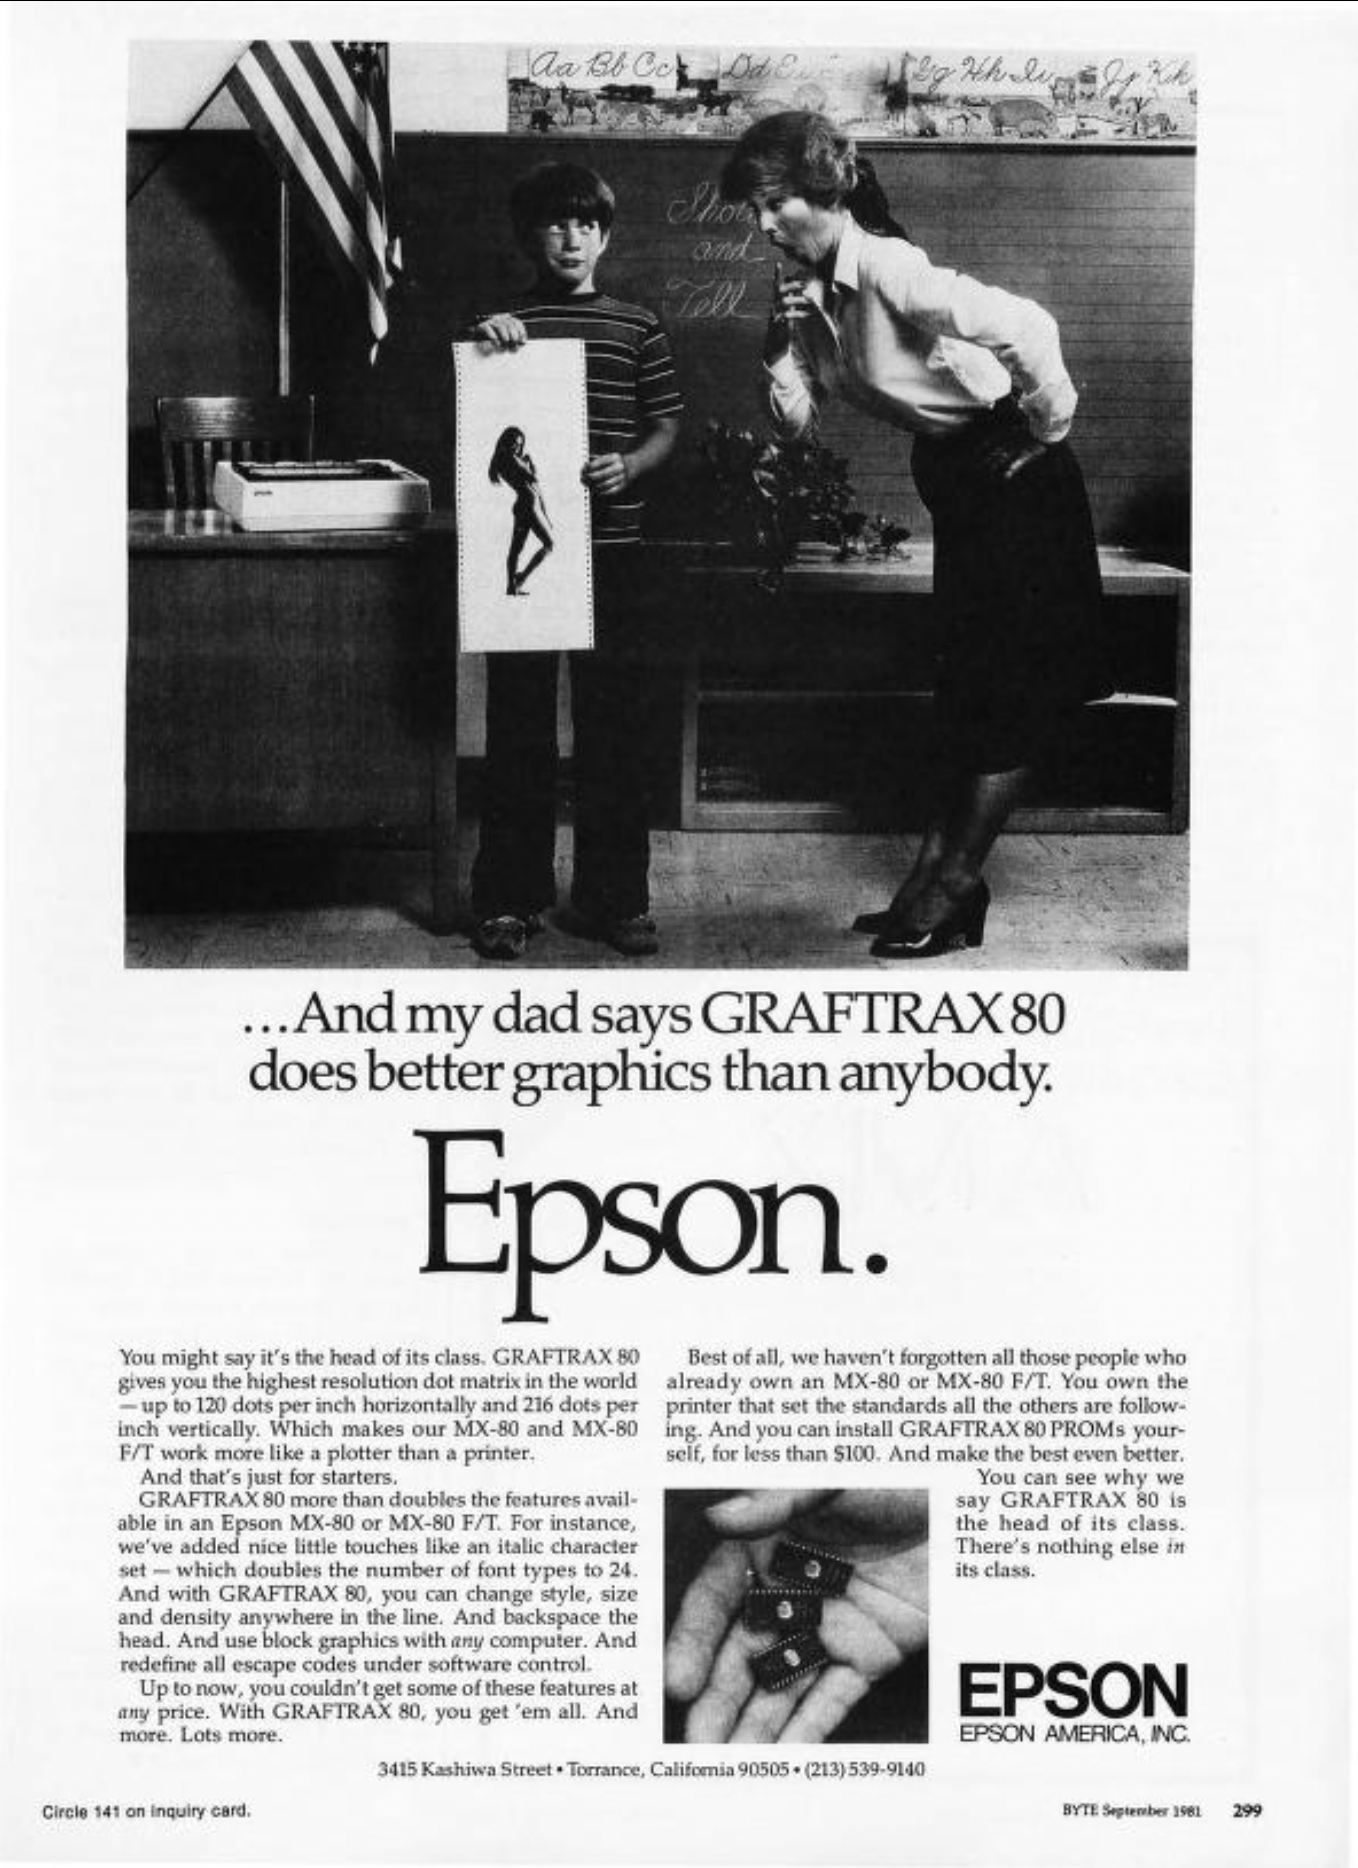 A black and white ad for an Epson printer. A little boy is standing in front of a classroom holding up a printout on fanfold tractor-fed paper. It’s a greyscale-looking picture of a woman who appears to be naked, covering her chest with one hand. The boy’s teacher is leaning over him, hand to mouth, looking astonished and dismayed. 
&10;
&10;Caption:
&10;
&10;“…And my dad says GRAFTRAX80 does better graphics than anybody. Epson.”